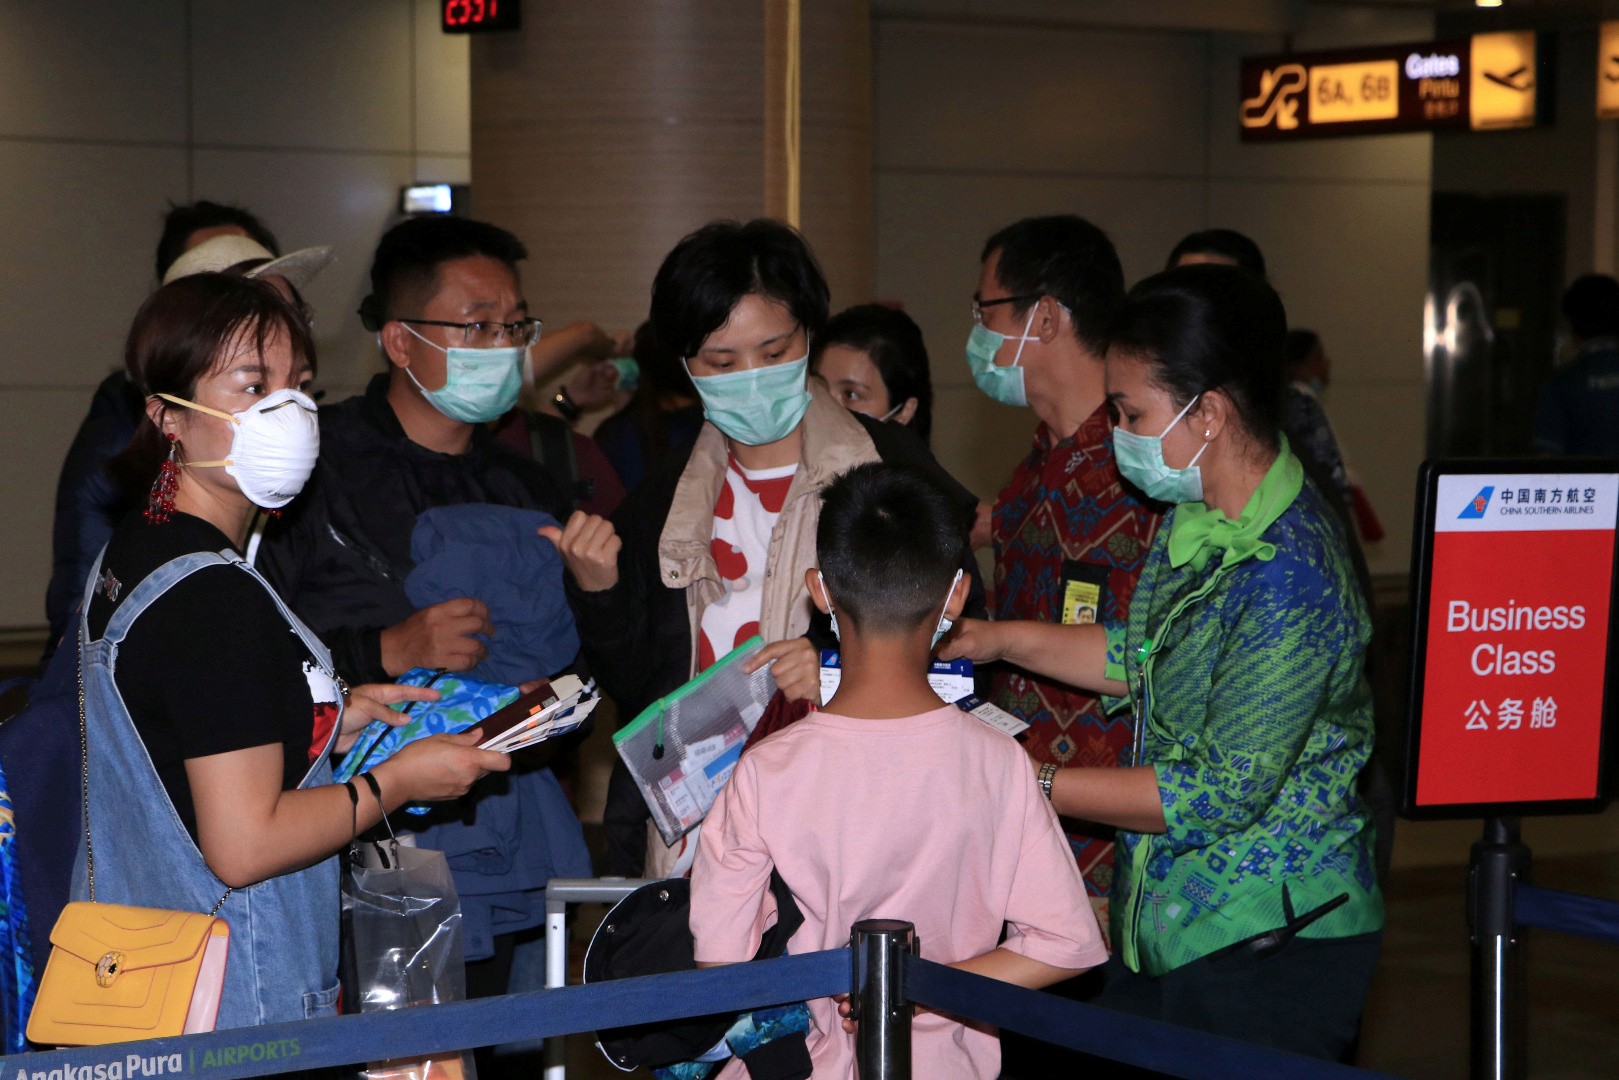 Coronavirus: 5,000 Chinese tourists stranded in Bali after Indonesia’s flight ban